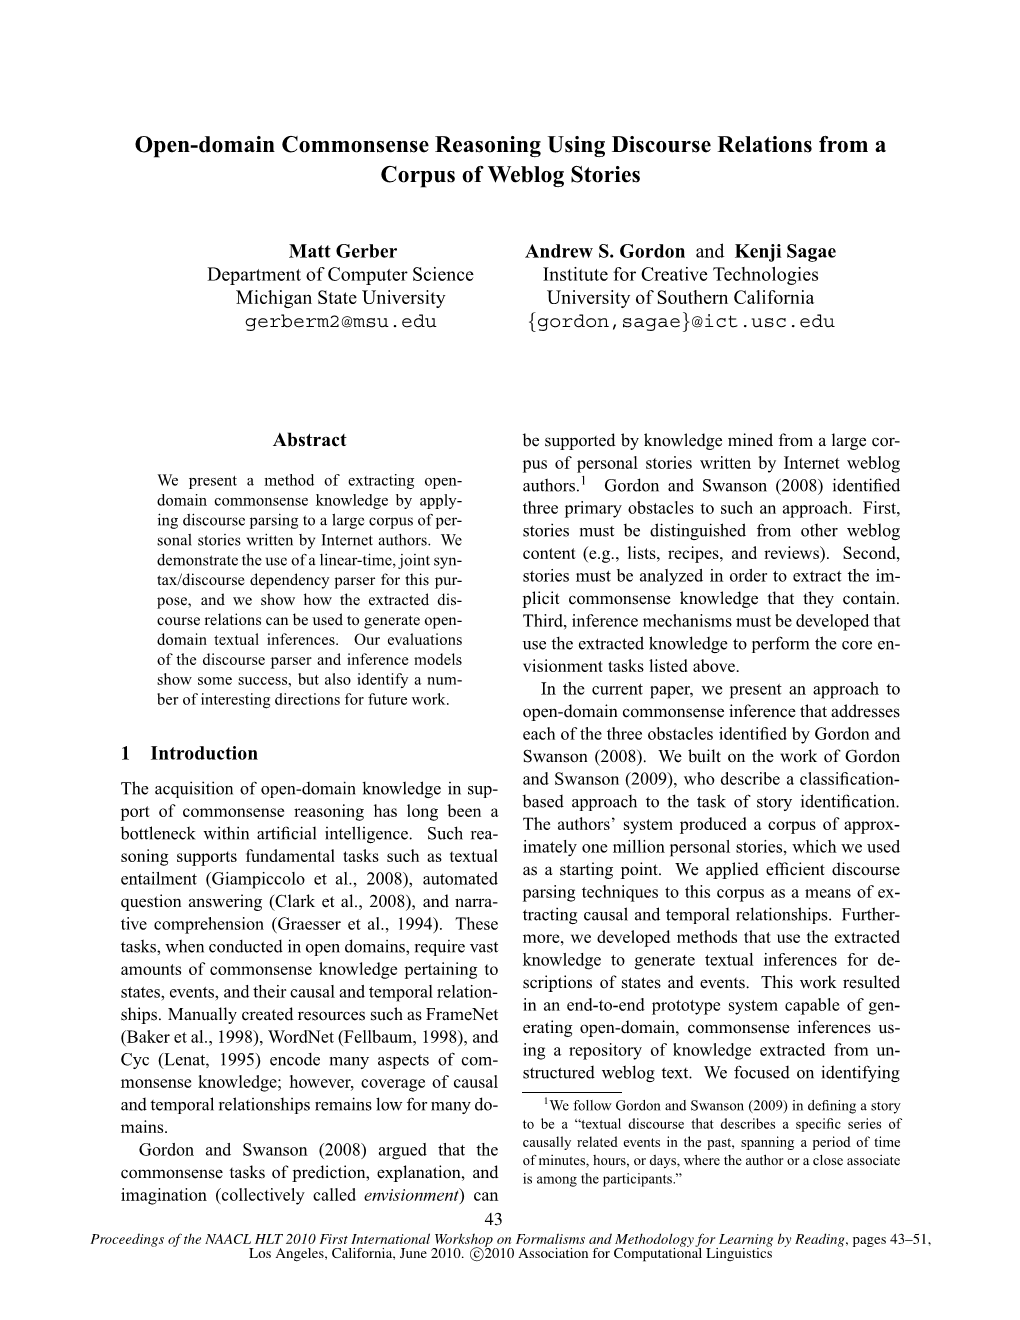 Open-Domain Commonsense Reasoning Using Discourse Relations from a Corpus of Weblog Stories